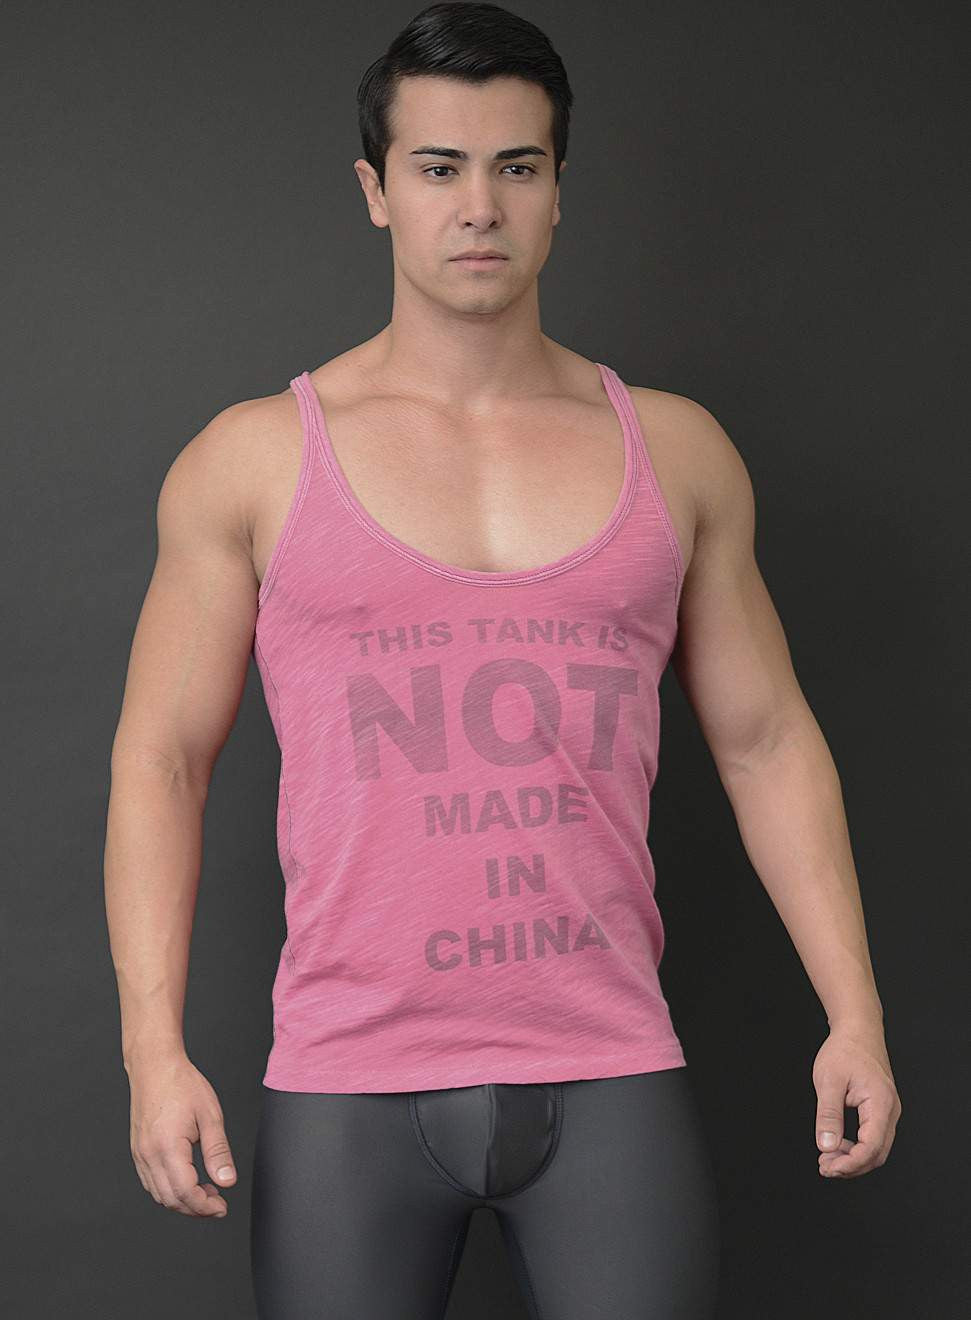 JESSE NOT MADE IN CHINA TANK